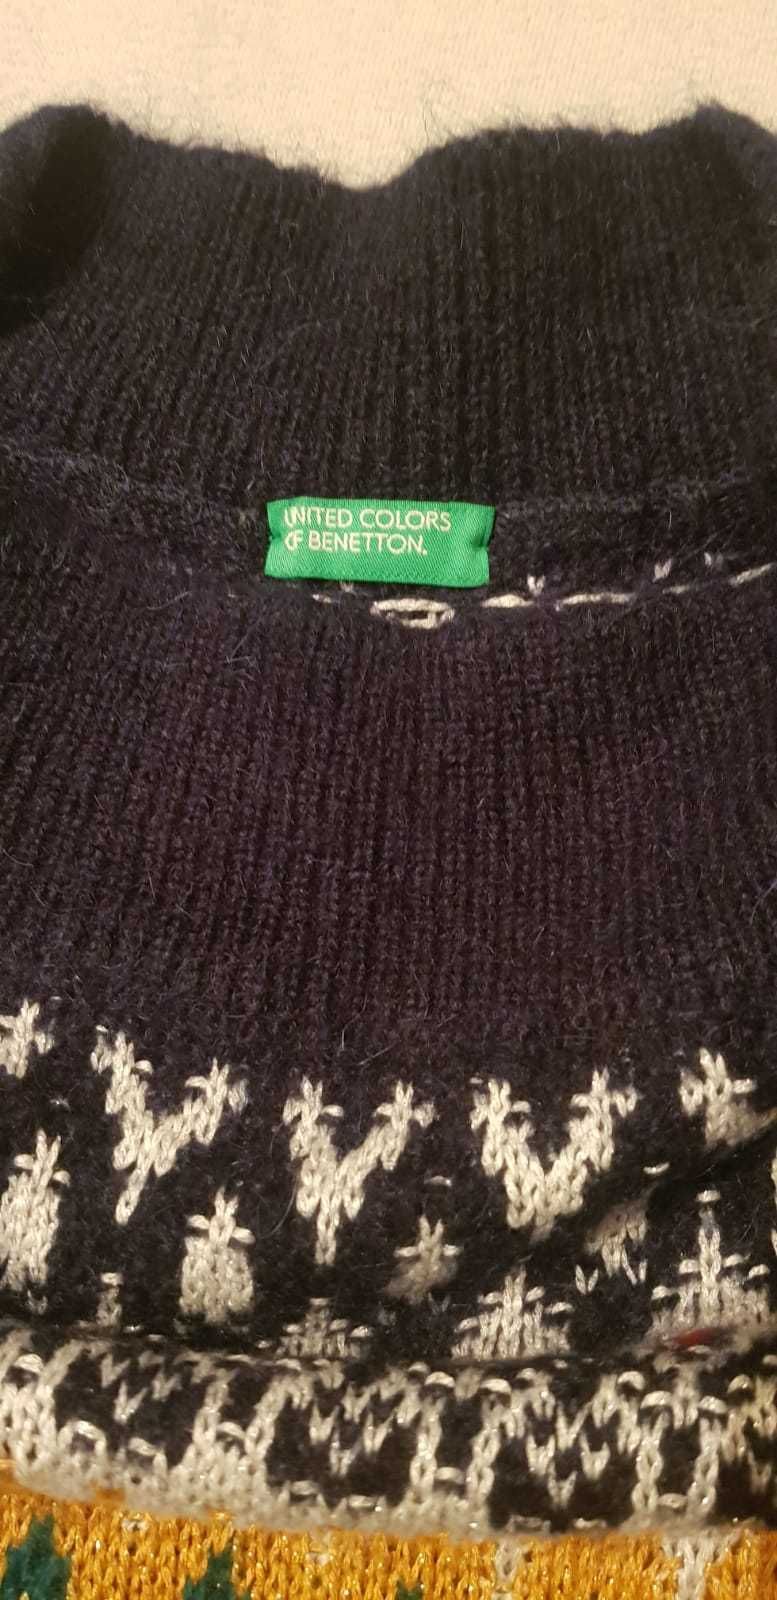 Sweter damski United Color of Benetton EUR 34 XS-S NOWY